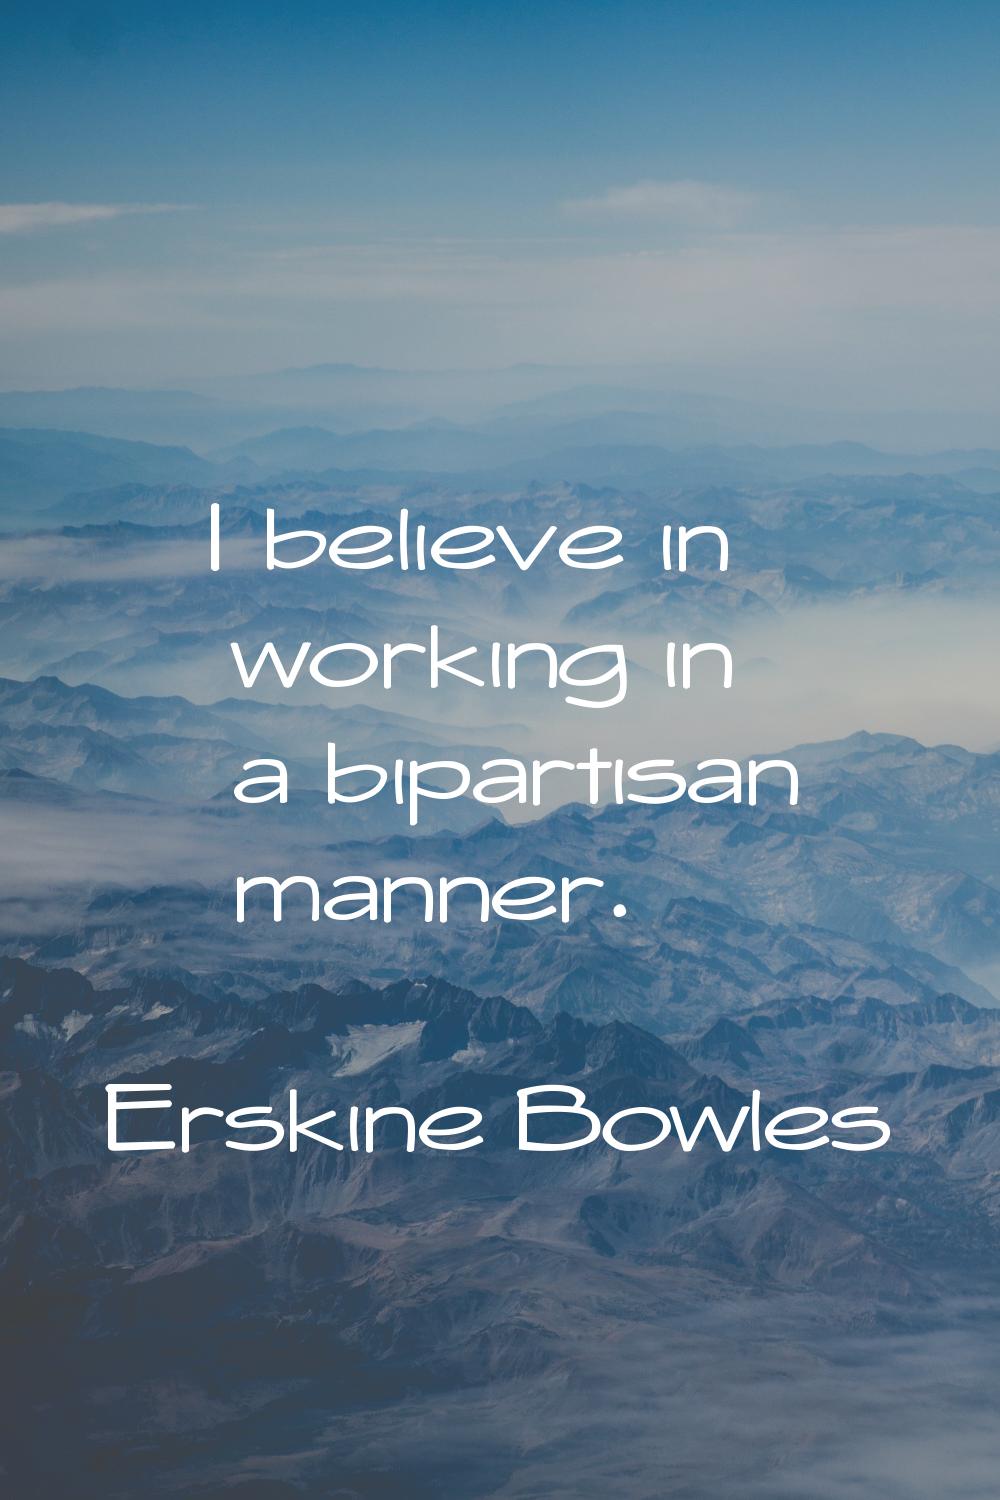 I believe in working in a bipartisan manner.